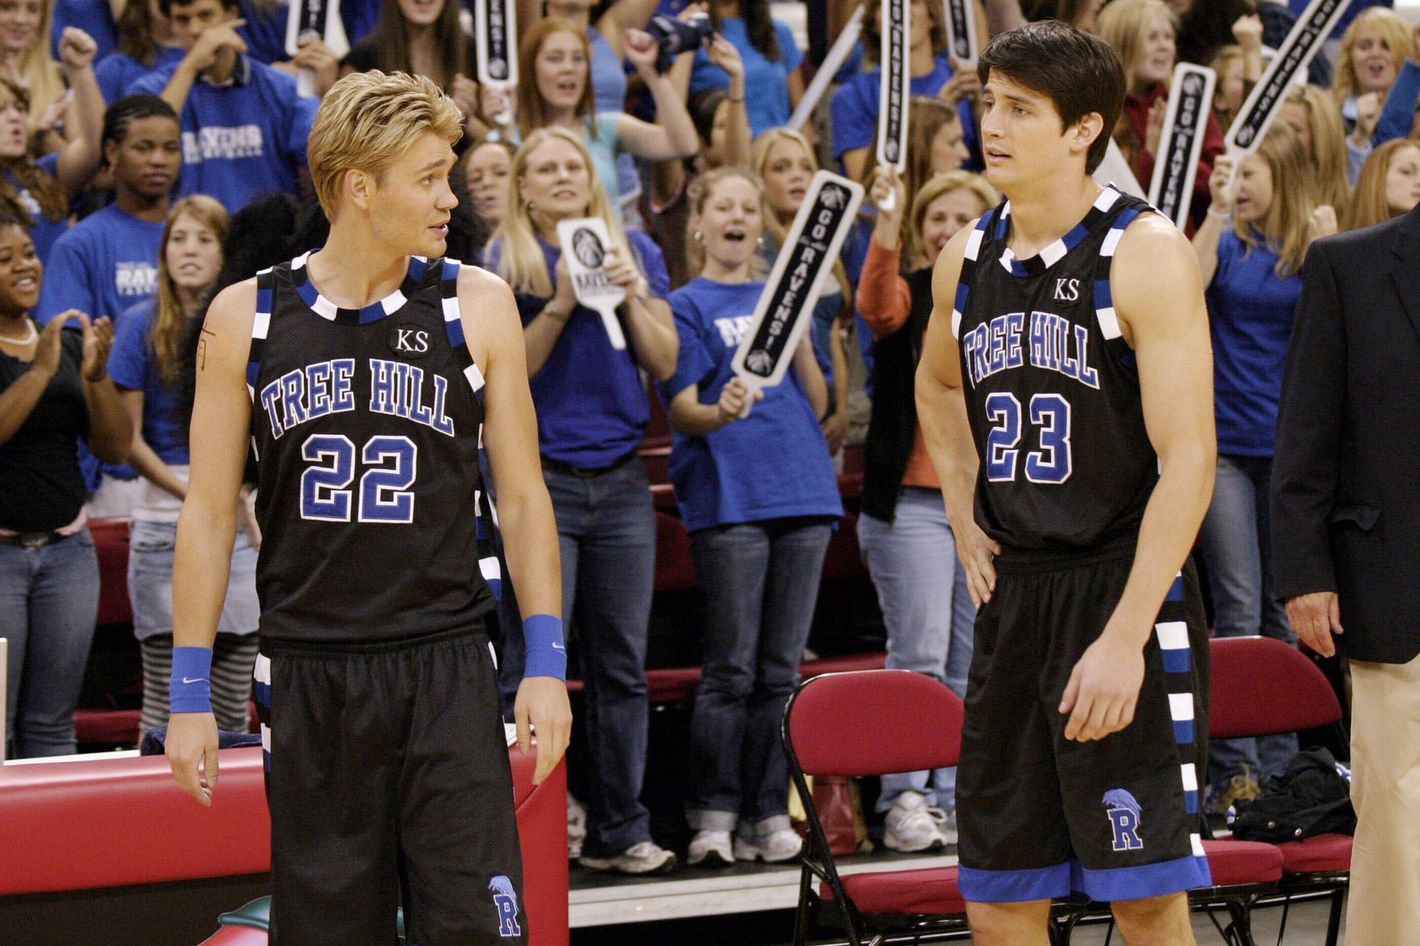 10 'One Tree Hill' Moments Made Memorable By Music